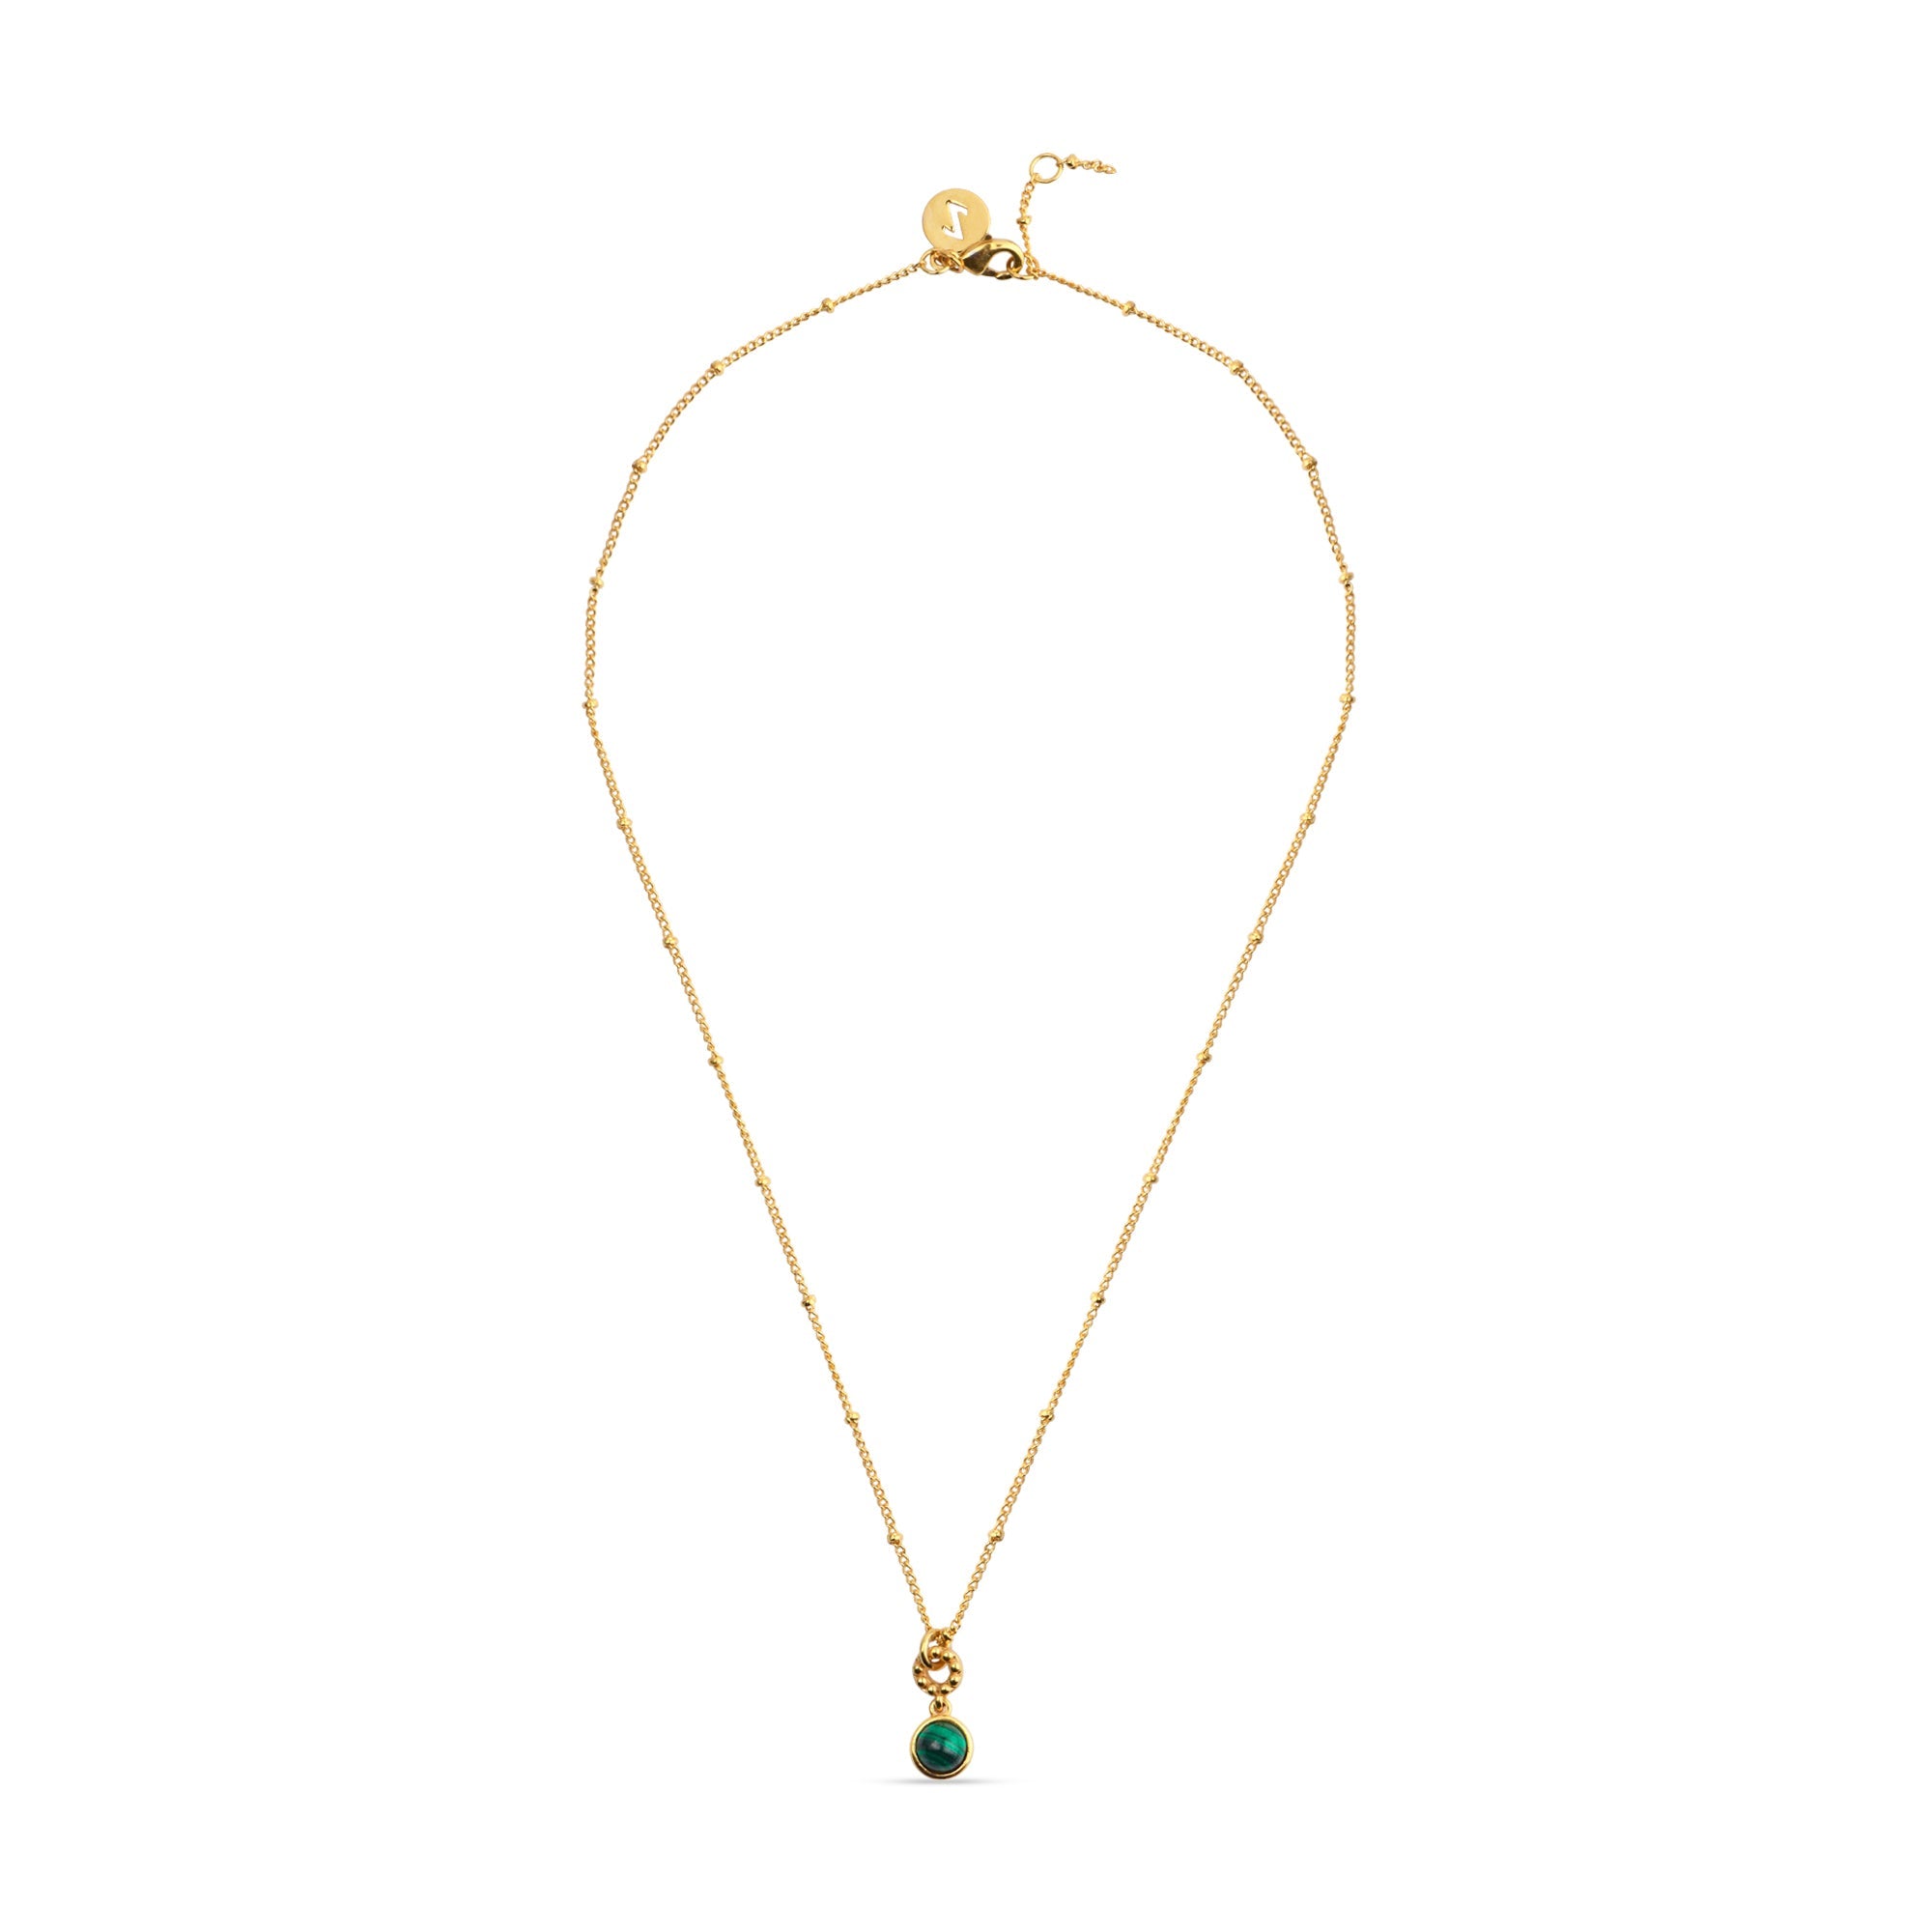 Real Gold Plated Z Modern Heirloom Malachite Pendant Necklace For Women By Accessorize London